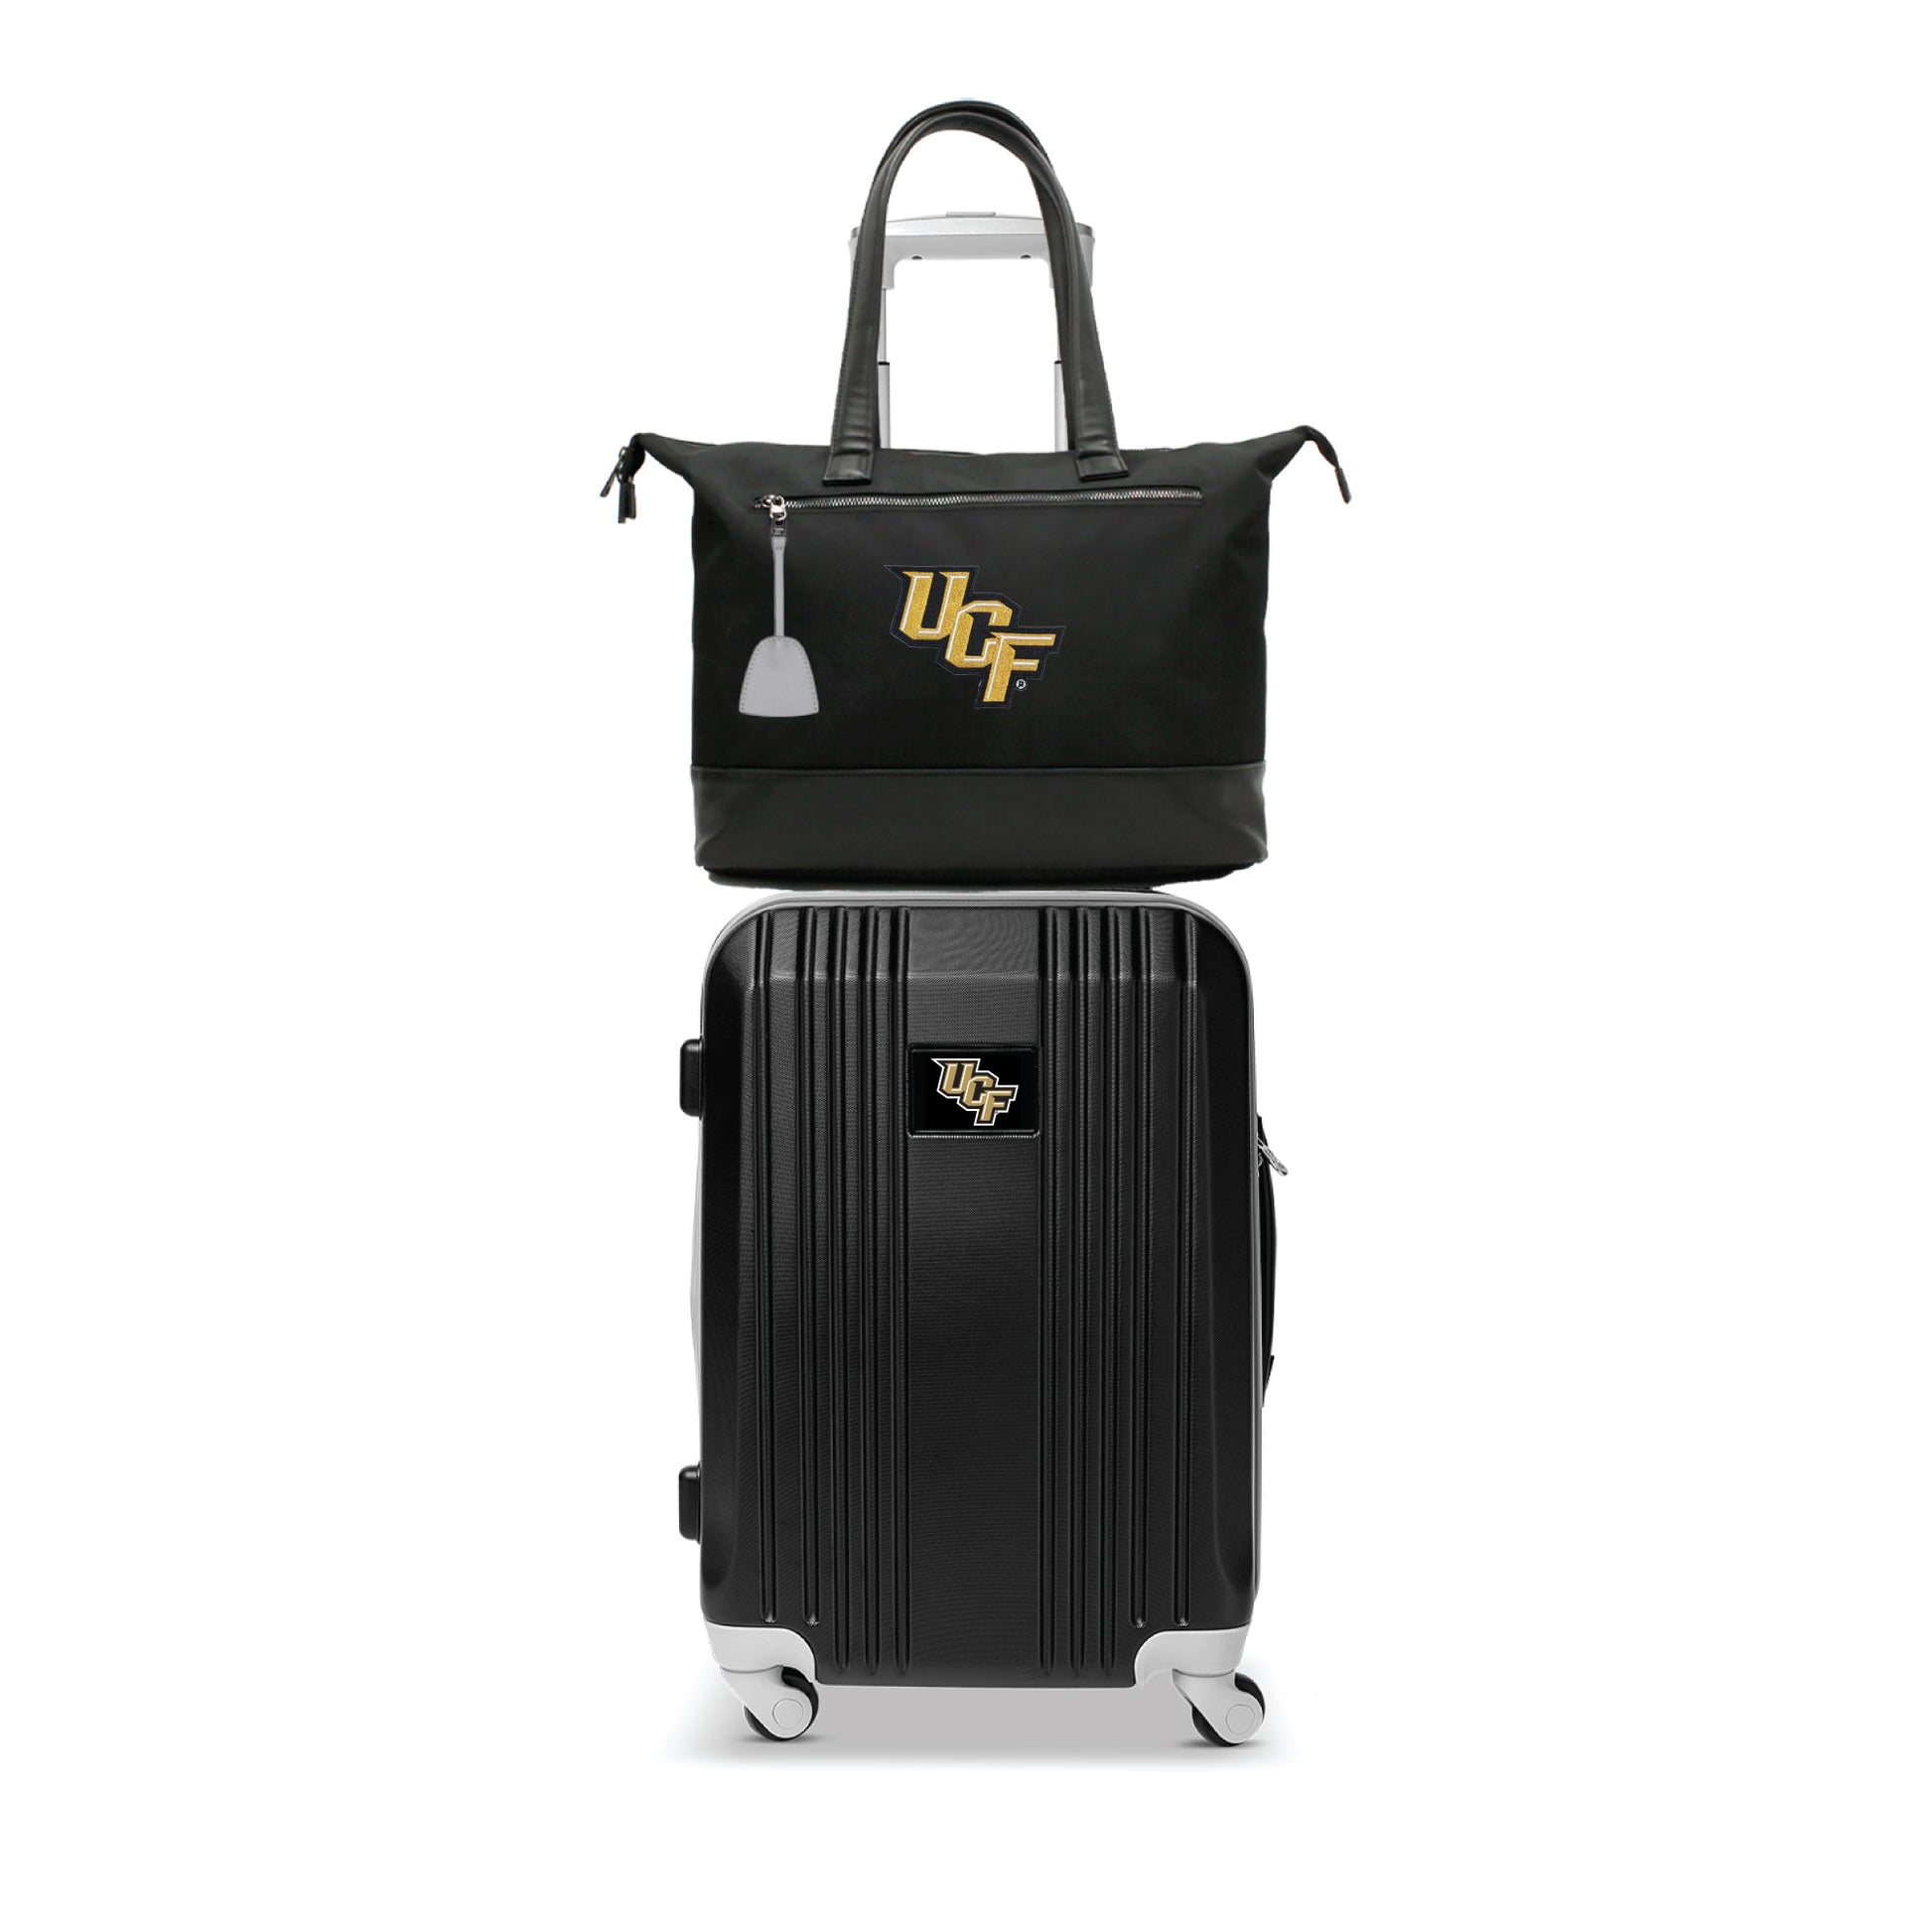 Central Florida Golden Knights Premium Laptop Tote Bag and Luggage Set